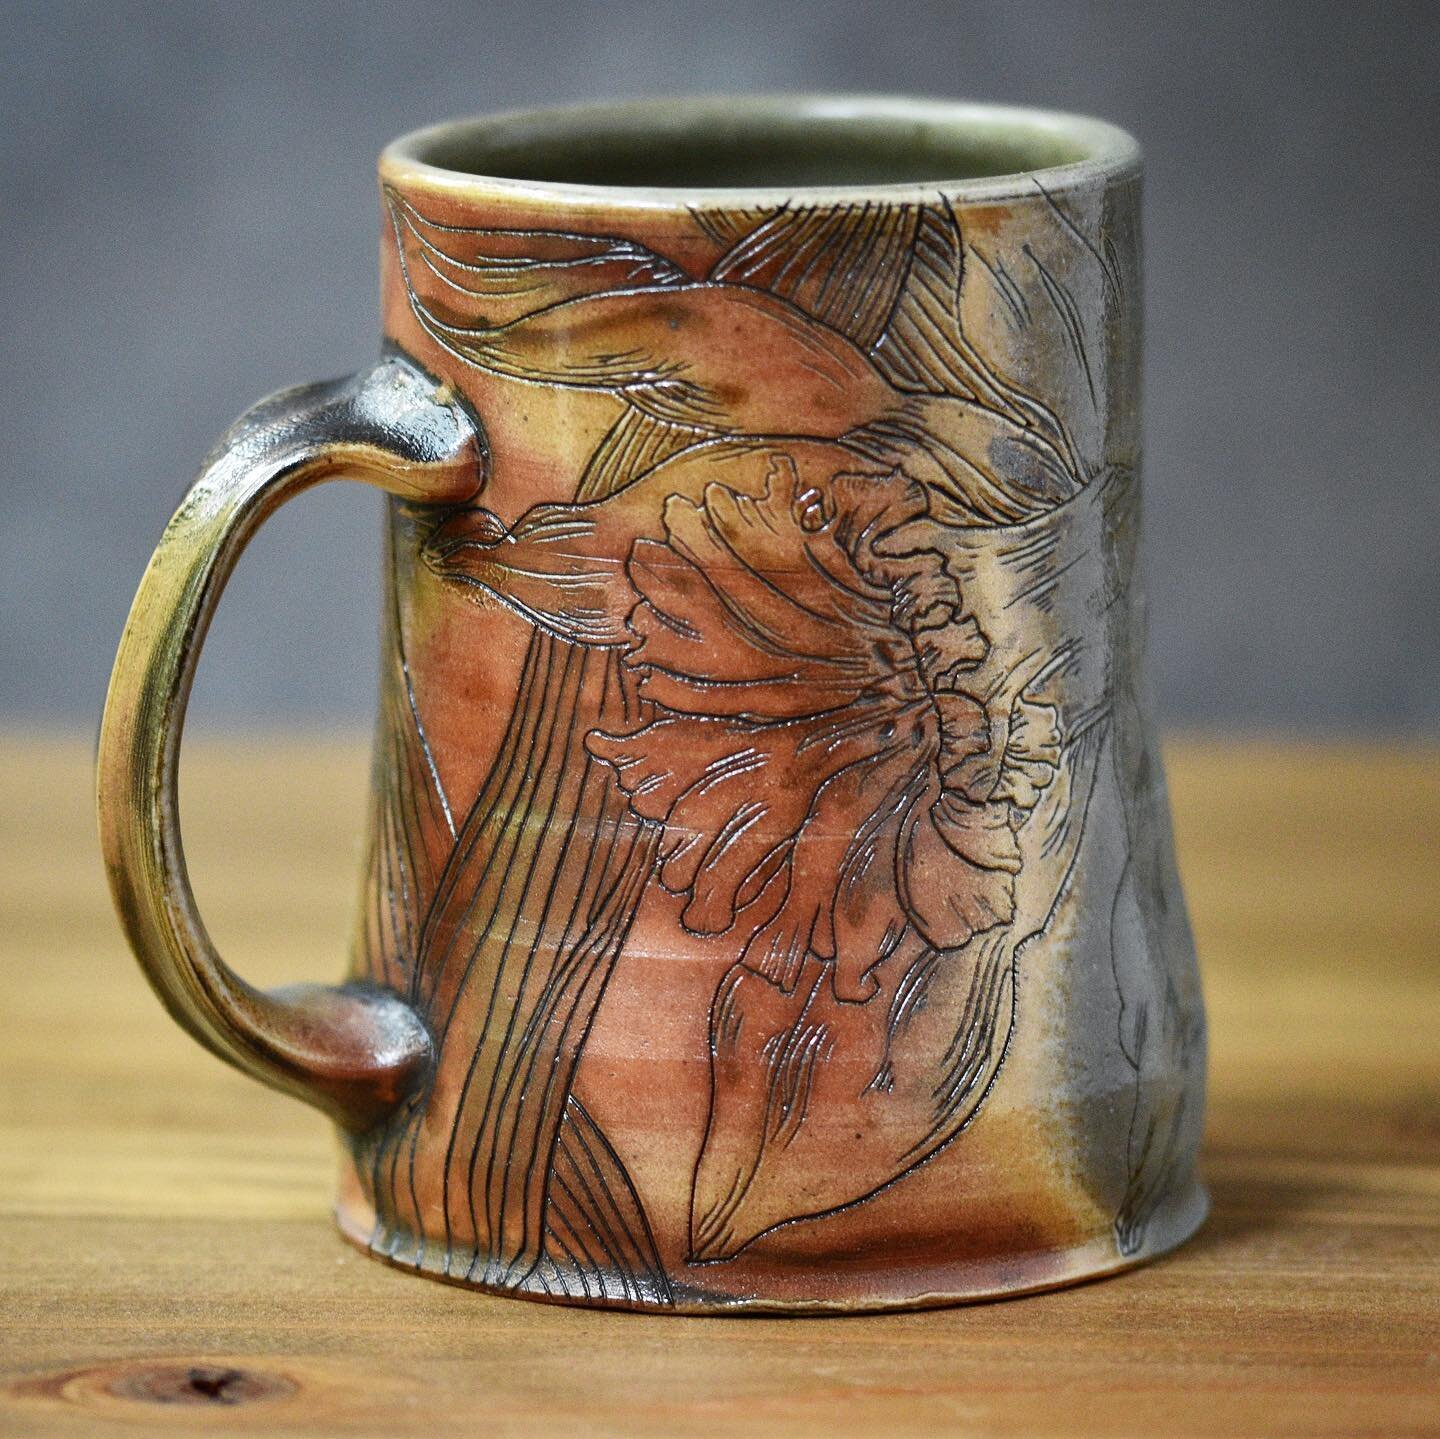 When we pulled this daffodil mug out of the wood kiln, I hated it. H-A-T-E-D-I-T. Yes, in screamy all-caps and stabby little dashes.
 
Back in May, after months of struggling with impaired vision and motor skills, there was a small window of time whe